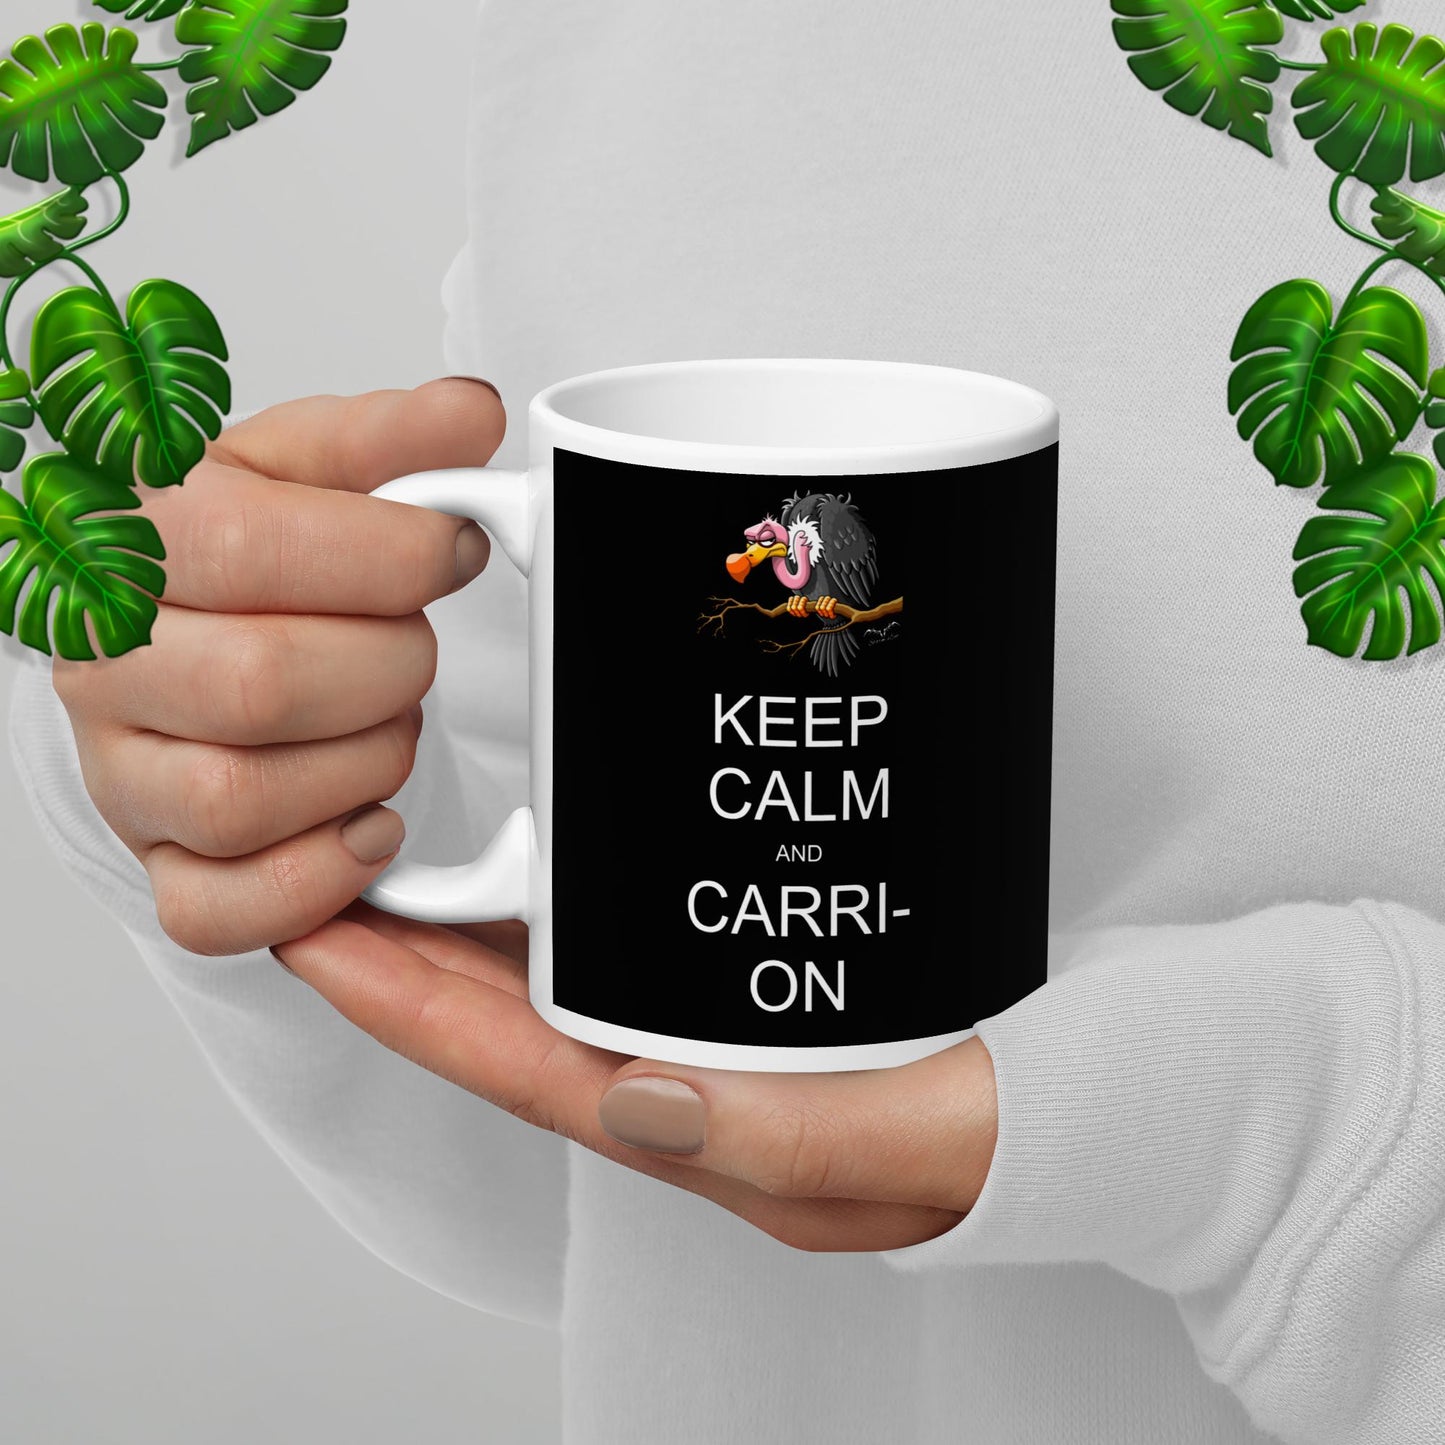 Keep Calm And Carrion Vulture Mug, black, by Stormseye Design